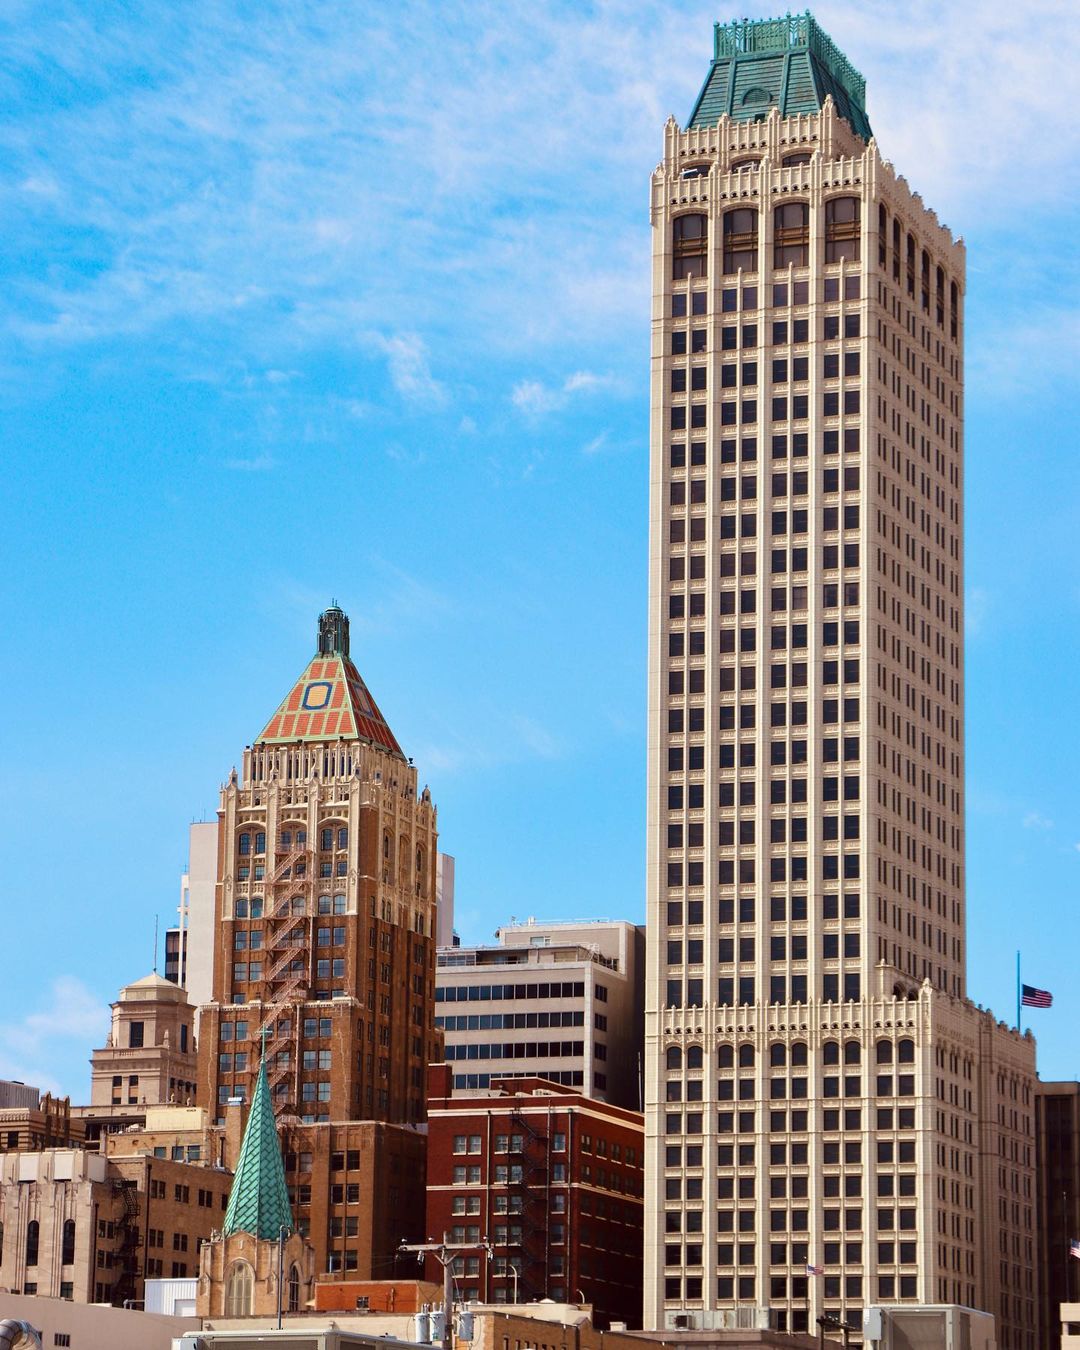 Tulsa OK Downtown Buildings During the Day. Photo by Instagram user @c.a.m.__photography